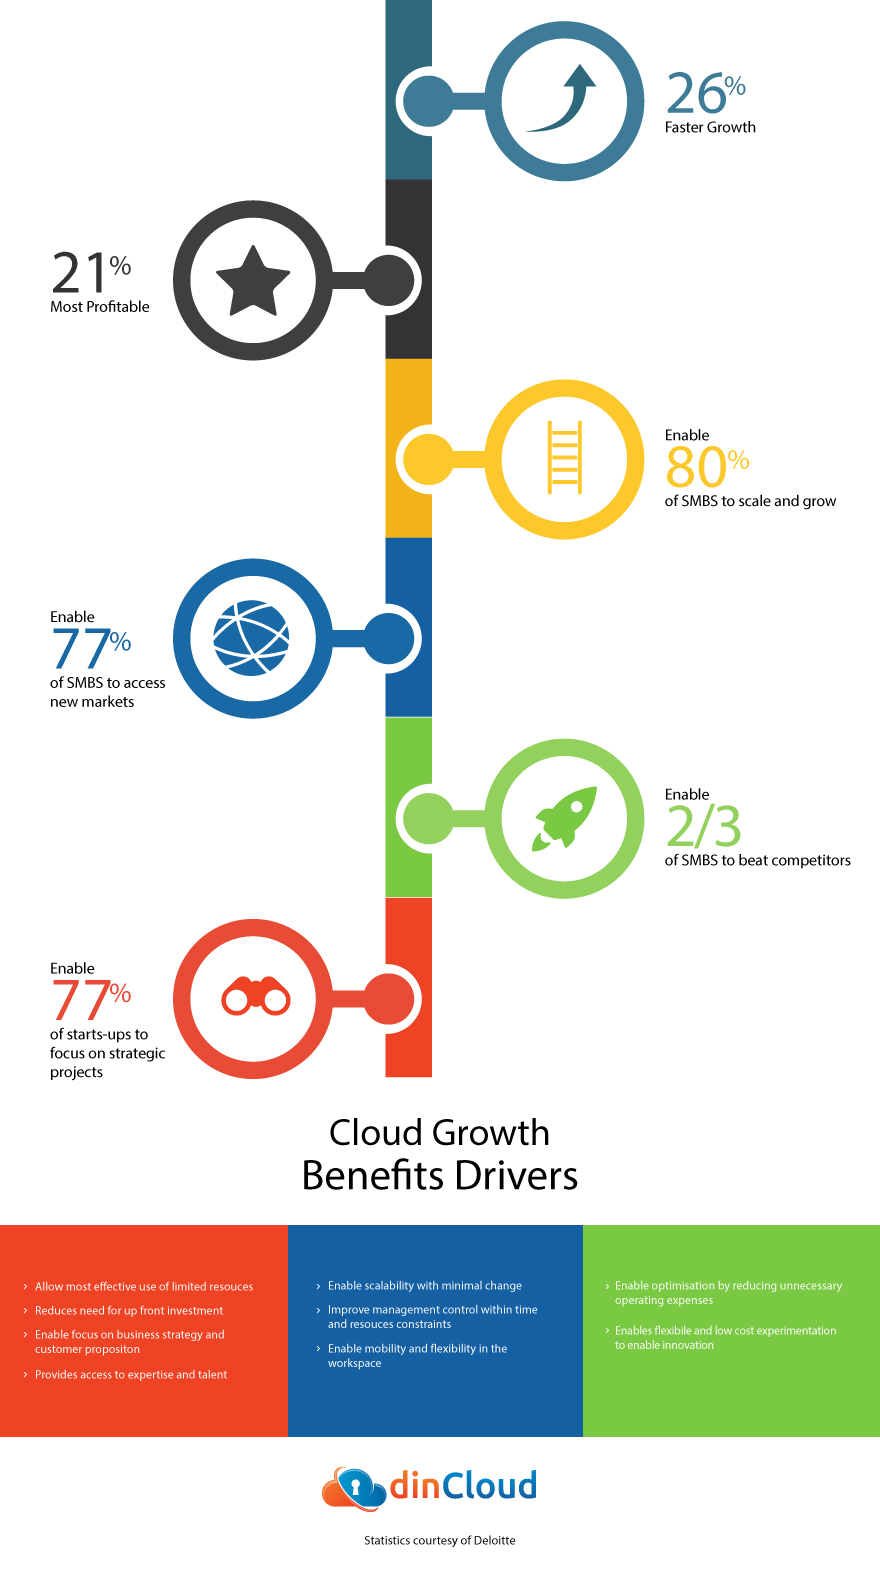 Deloitte Shares How the Cloud Enables Rapid Growth for SMBs